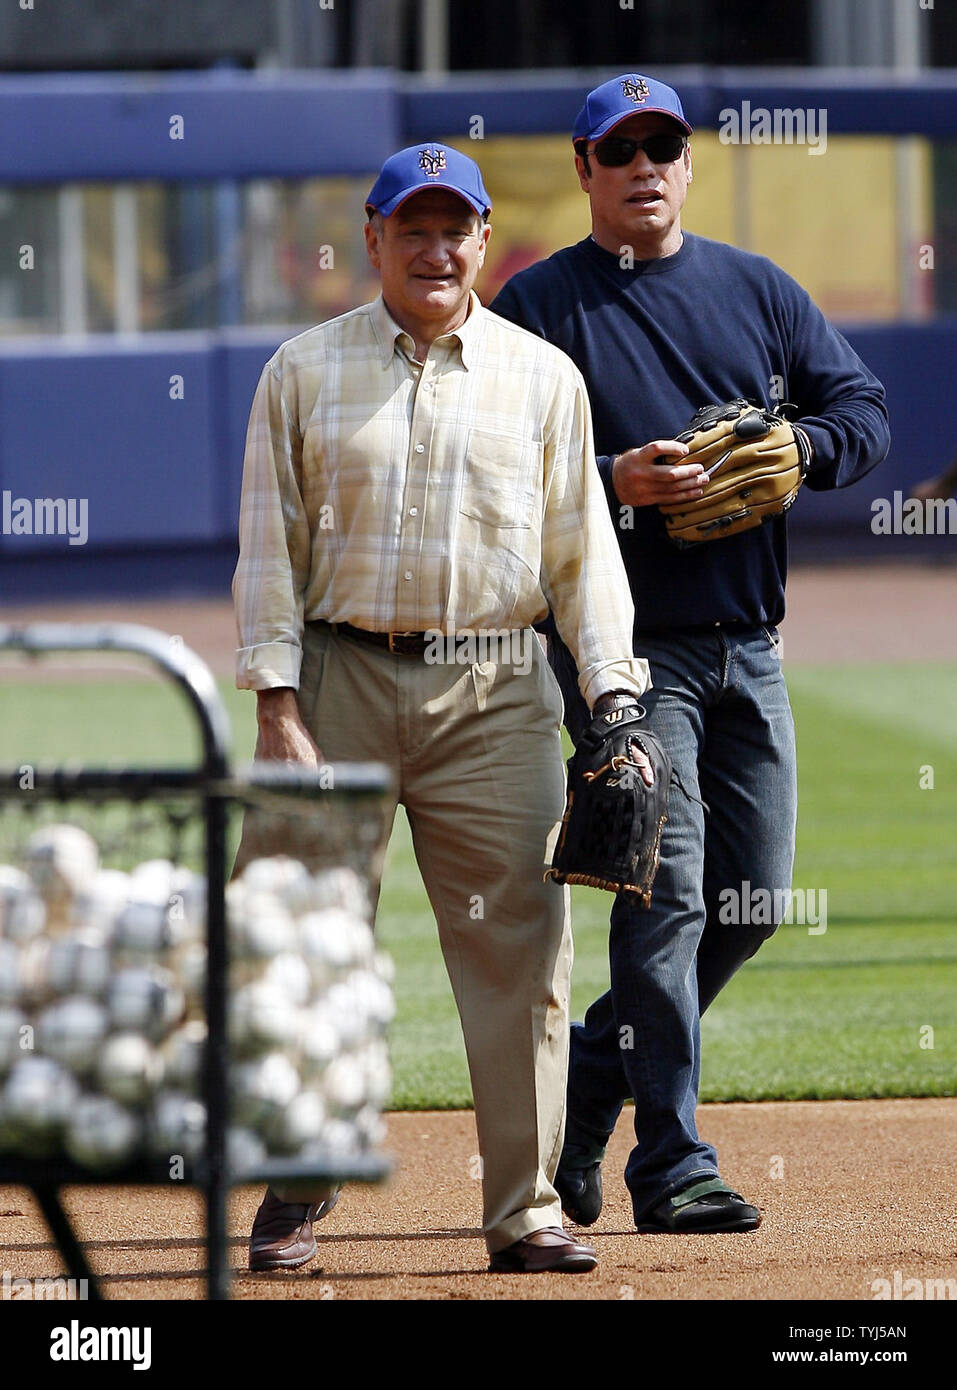 Robin Williams (L) and John Travolta play the infield while shooting the movie 'Old Dogs' at Shea Stadium in New York City on July 26, 2007.  (UPI Photo/John Angelillo) Stock Photo